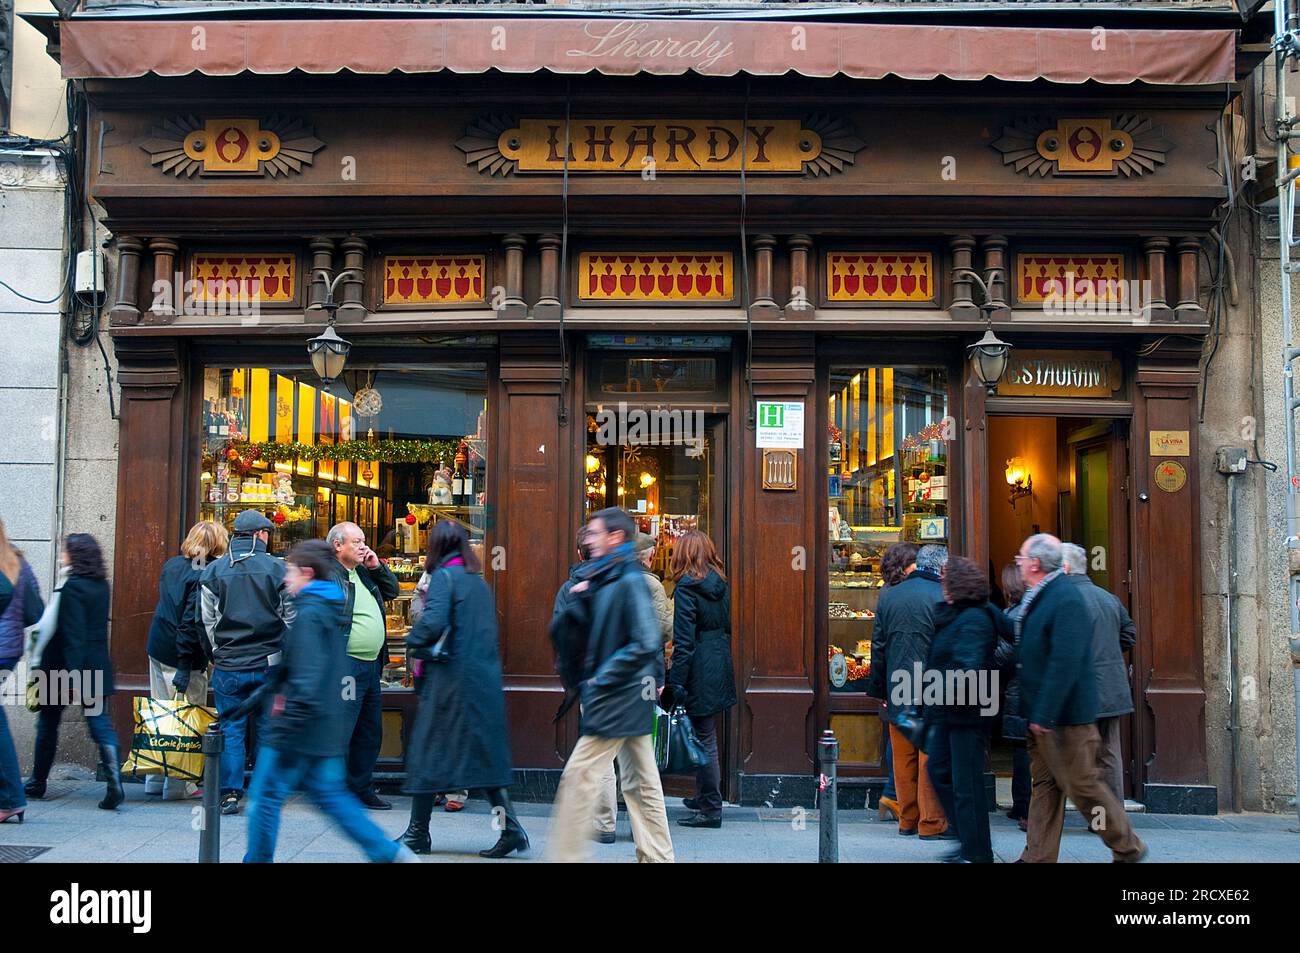 Facade of Lhardy restaurant. Madrid, Spain. Stock Photo